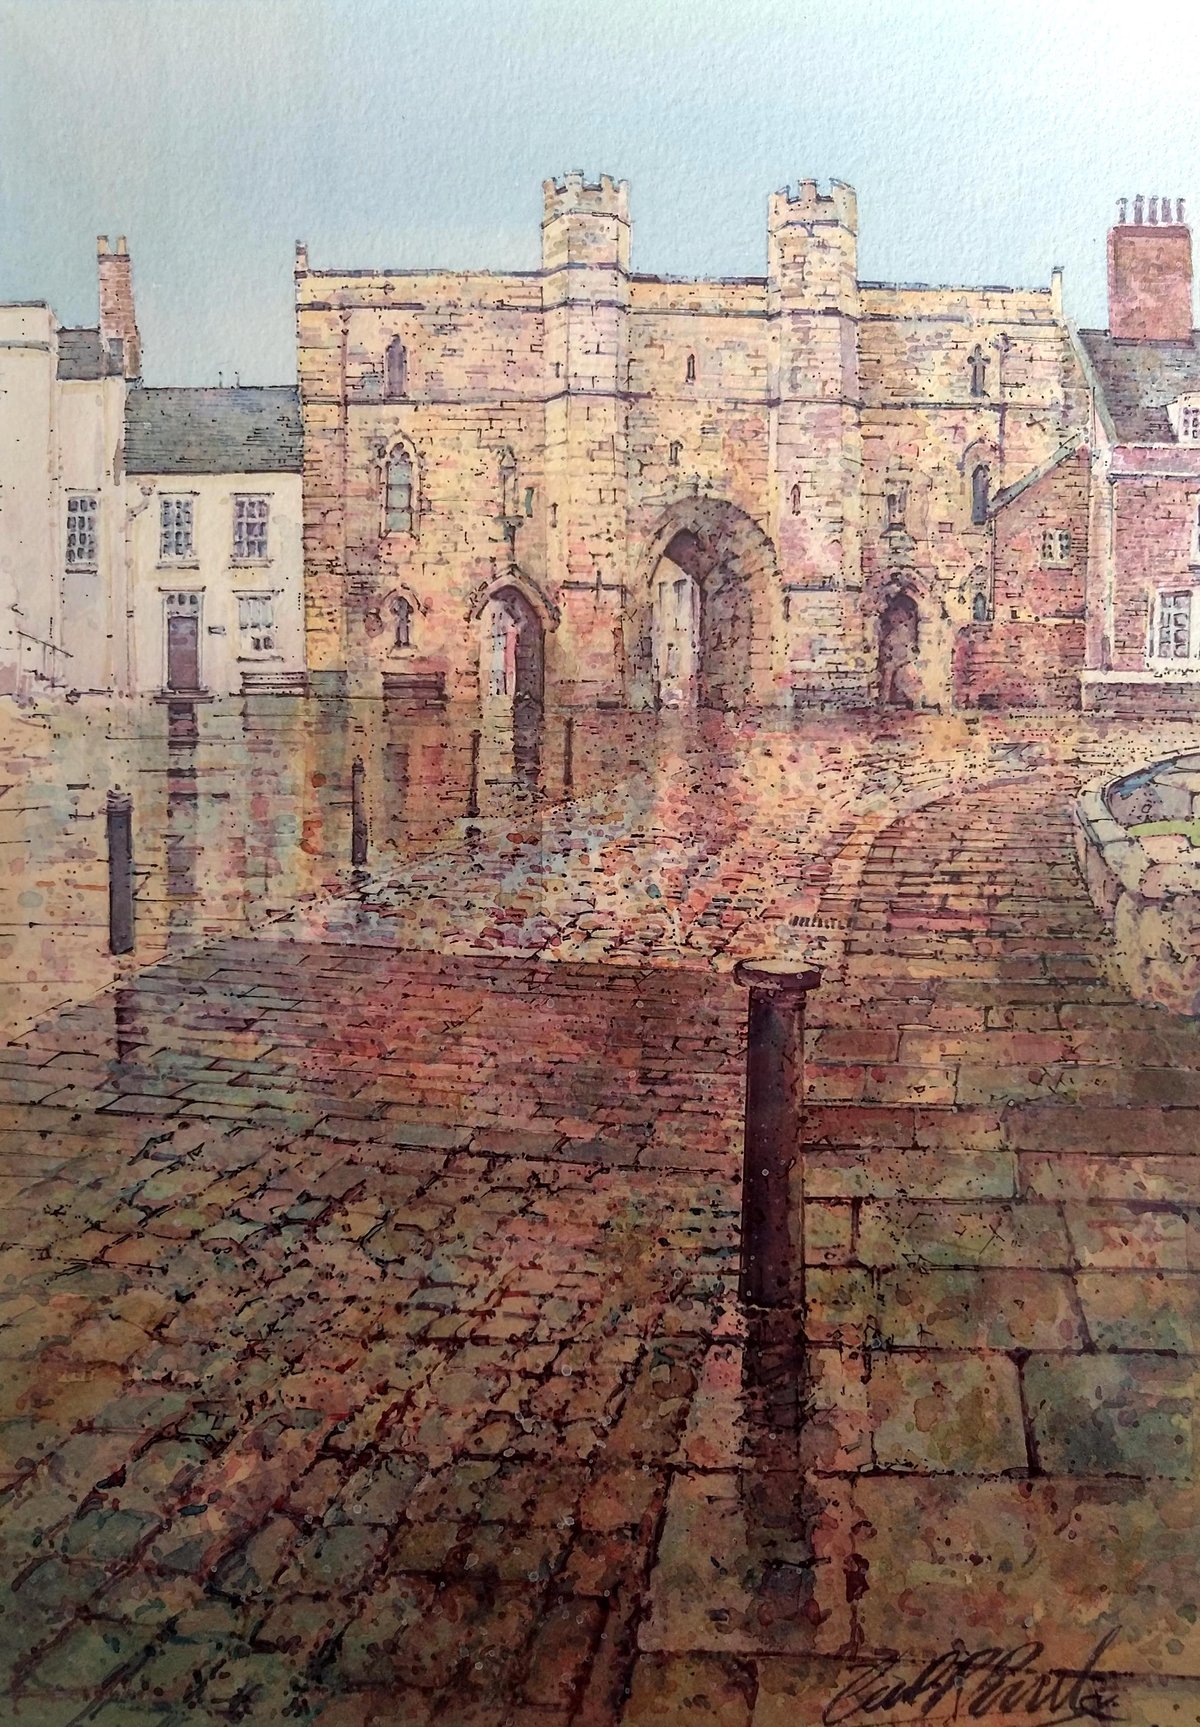 Carl Paul "April Showers, Exchequer Gate, Lincoln"